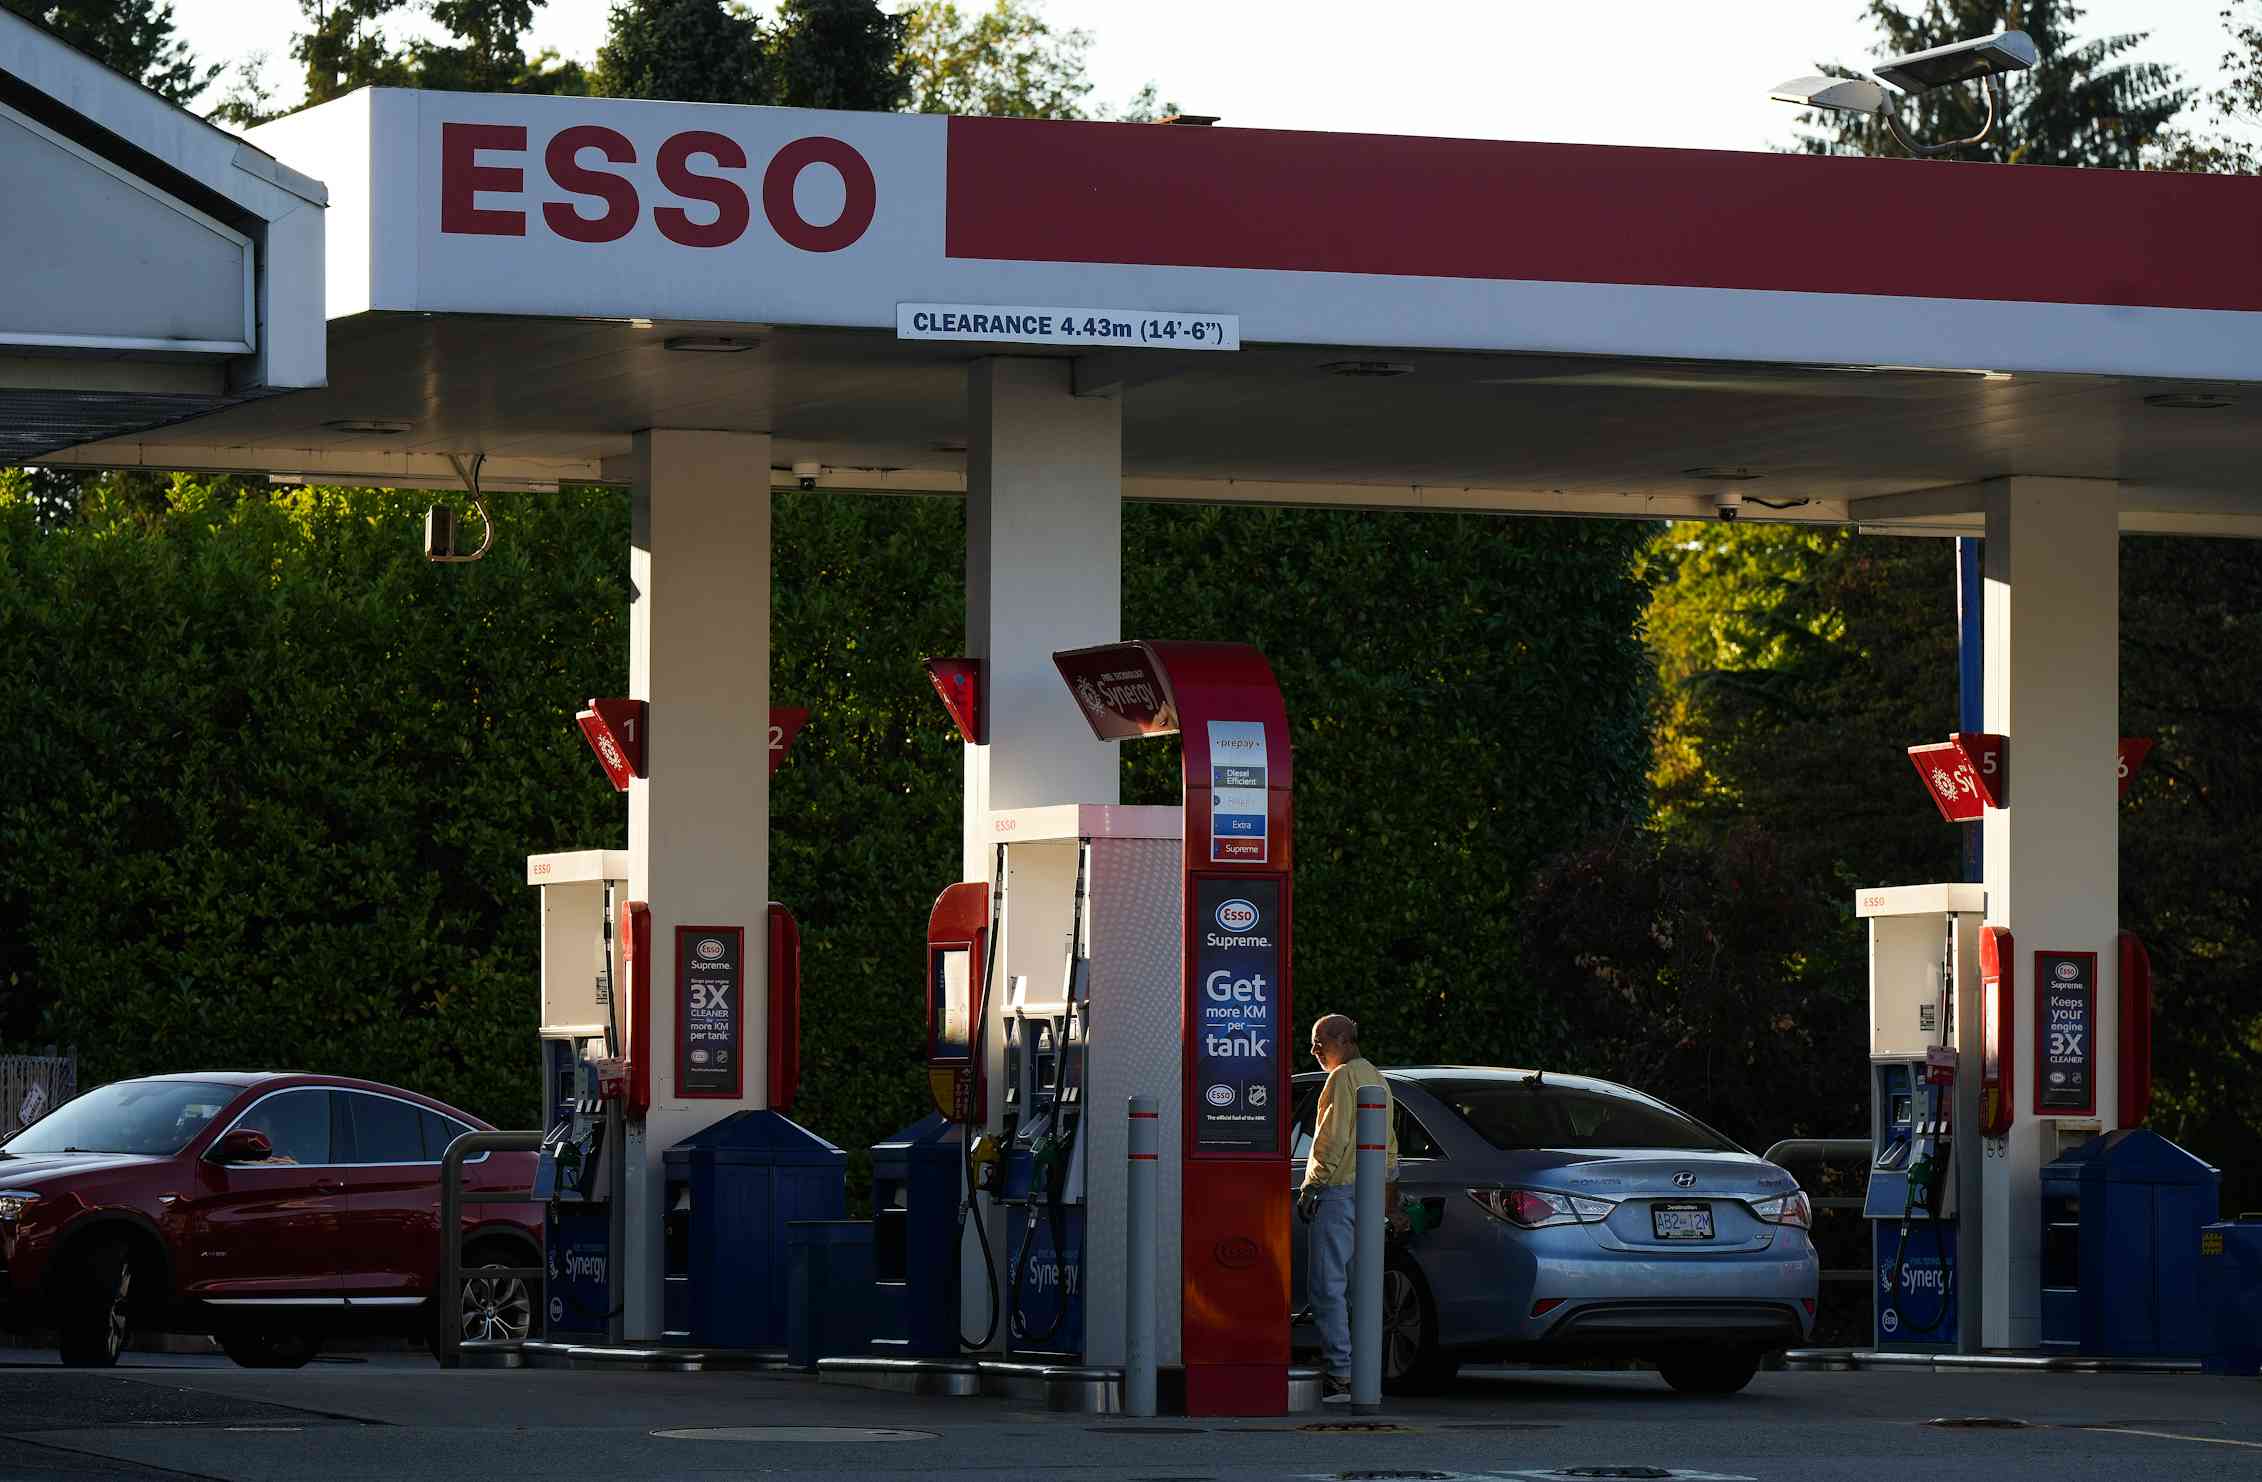 A person fuels up their car at an Esso gas station